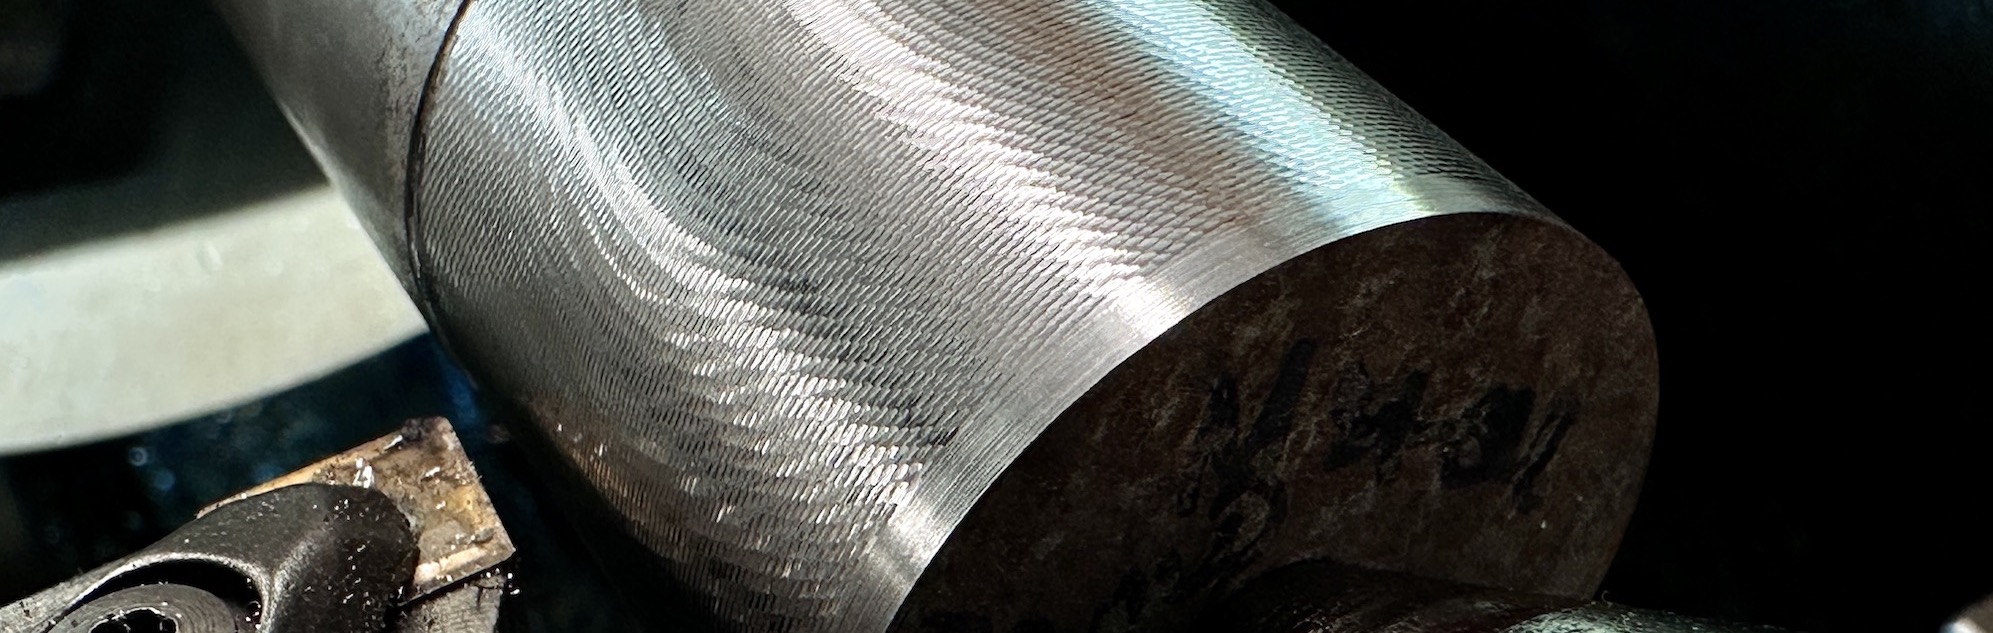 Surface, which is machined with vibrations. photo.